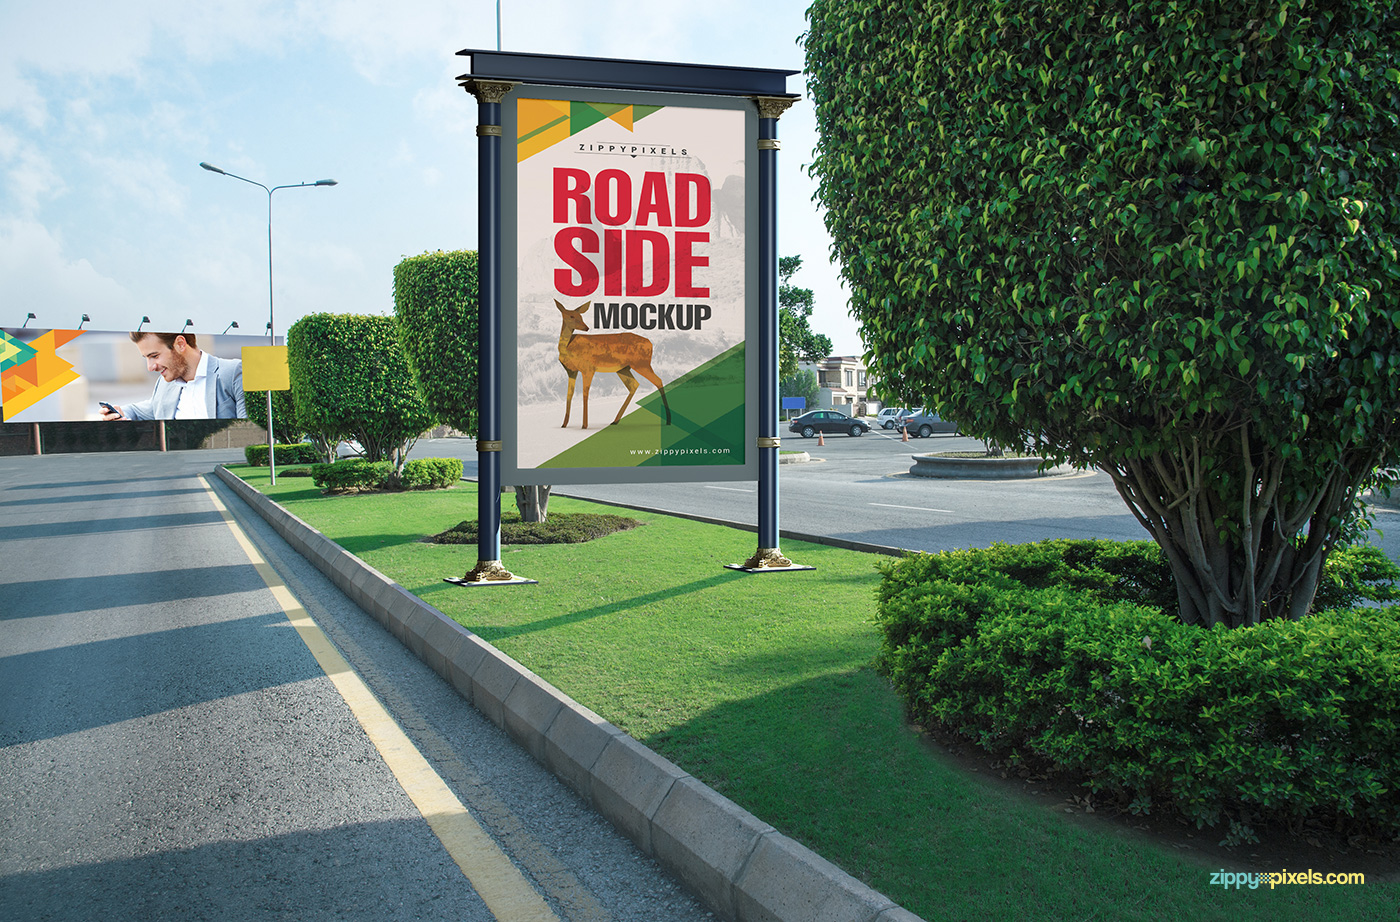 Mockup mockups psd outdoor advertising ad mockup advertisement Billboards Ad Posters ad banners photoshop presentation Roadside advertising photorealistic adverts ad design